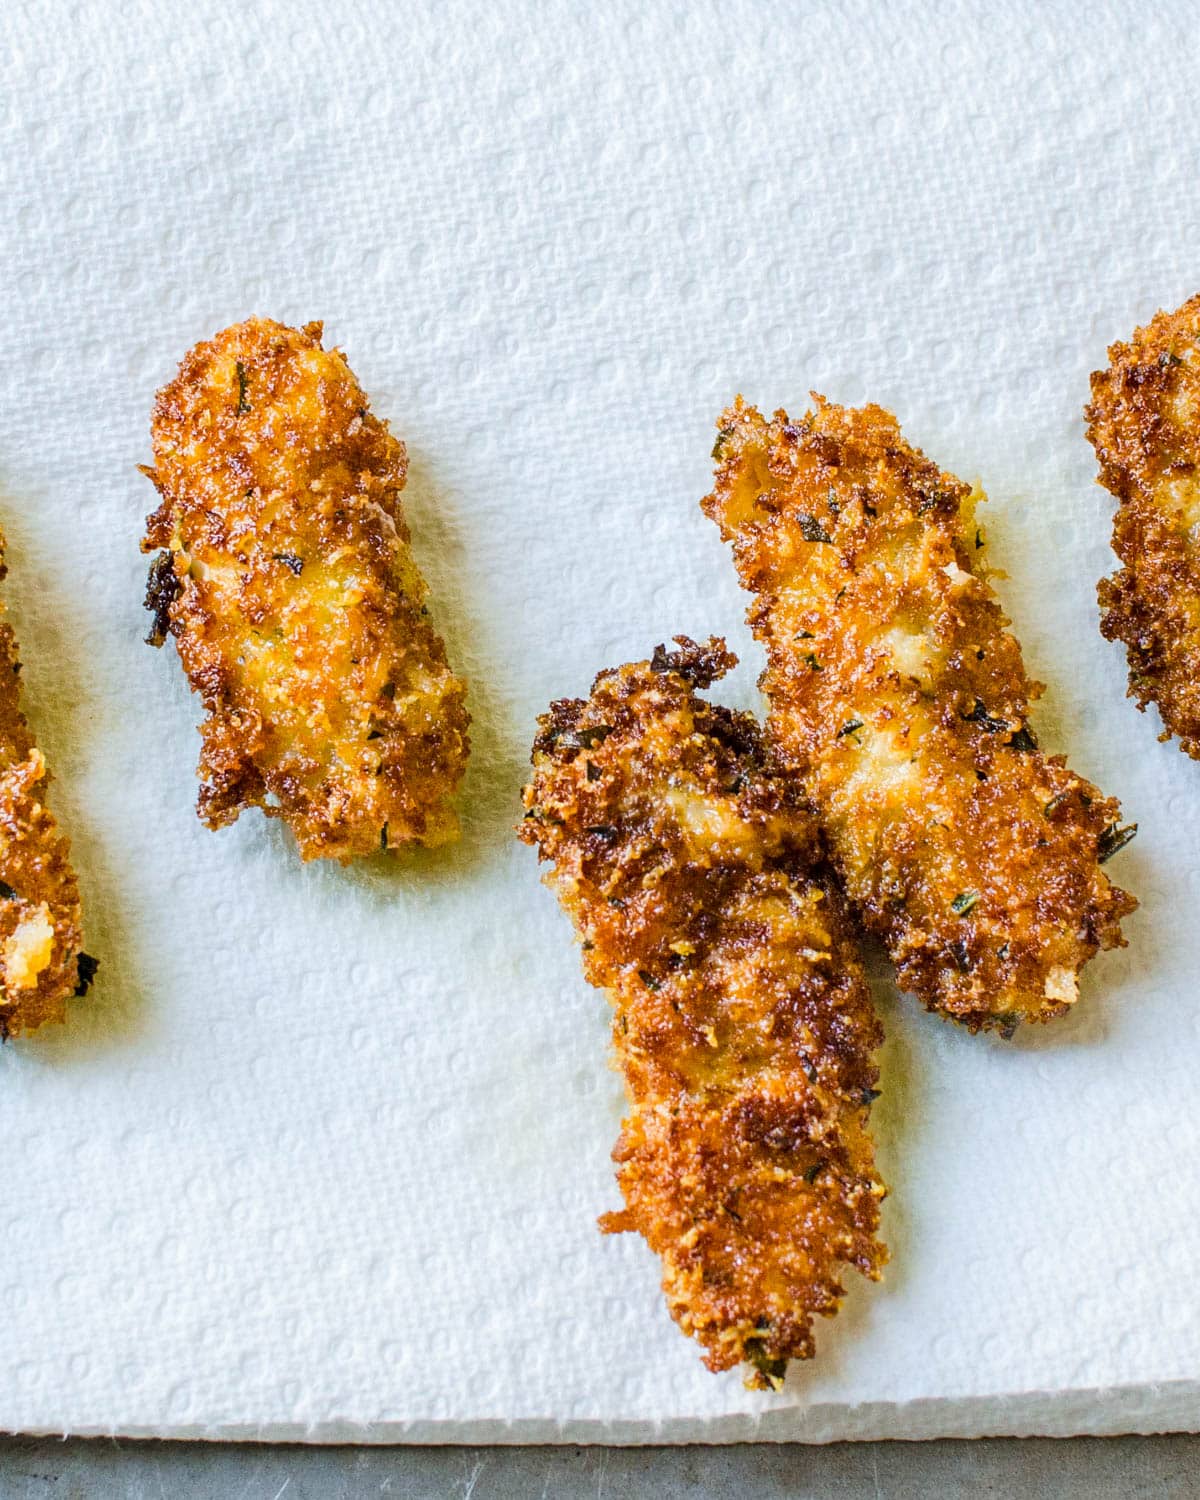 Drain the fried oysters on paper towels.